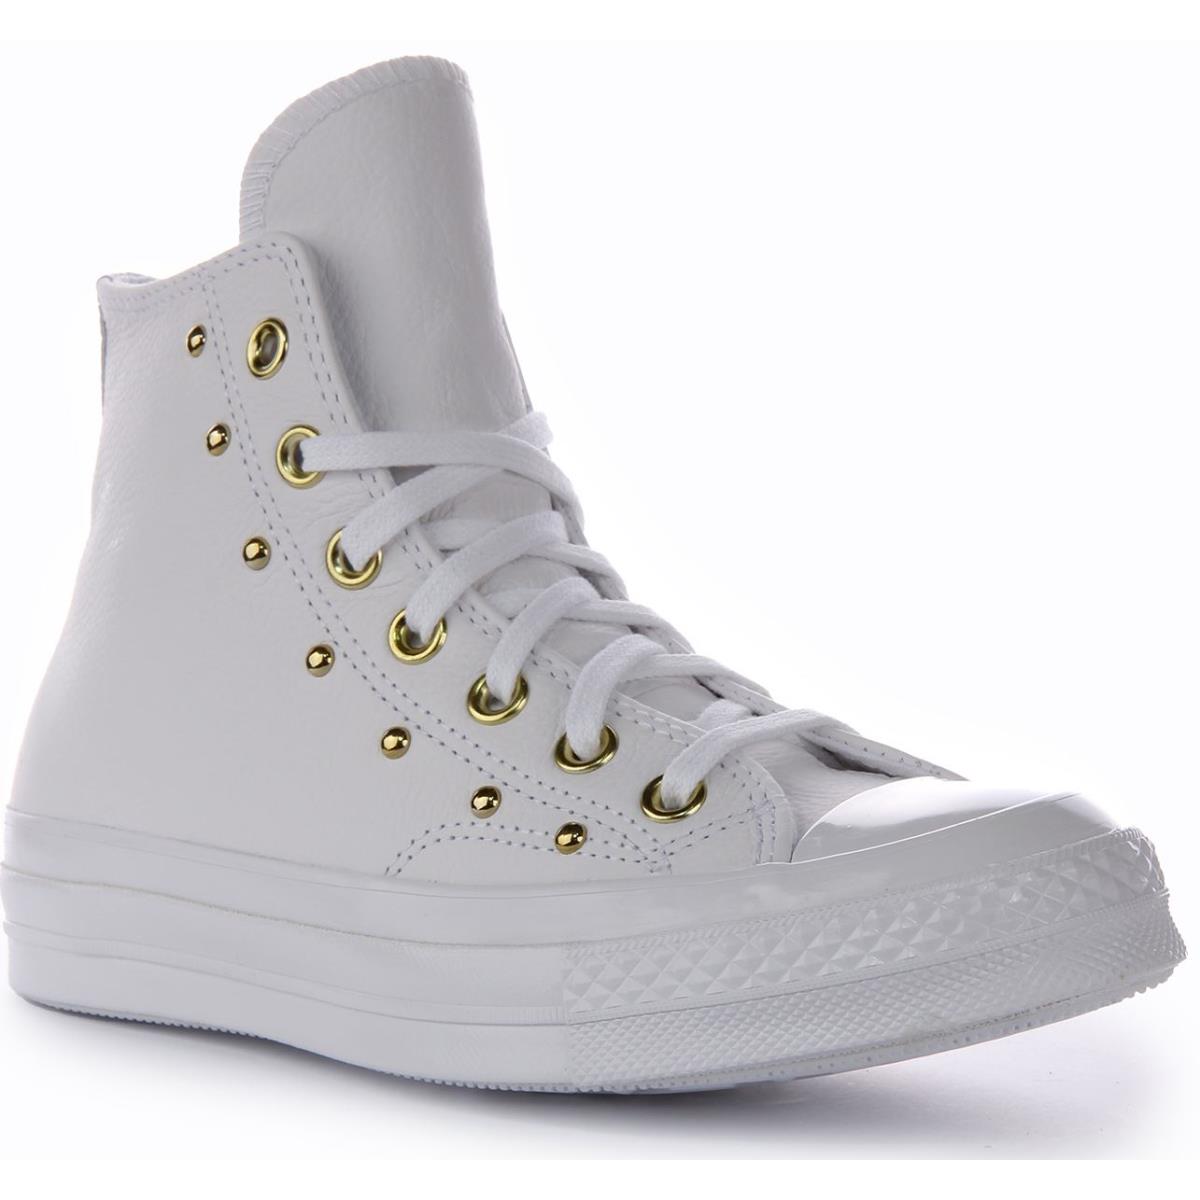 Converse A06808C Chuck 70 Hi Top Studded Leather Shoe White Gold Womens US 4 - 9 WHITE GOLD